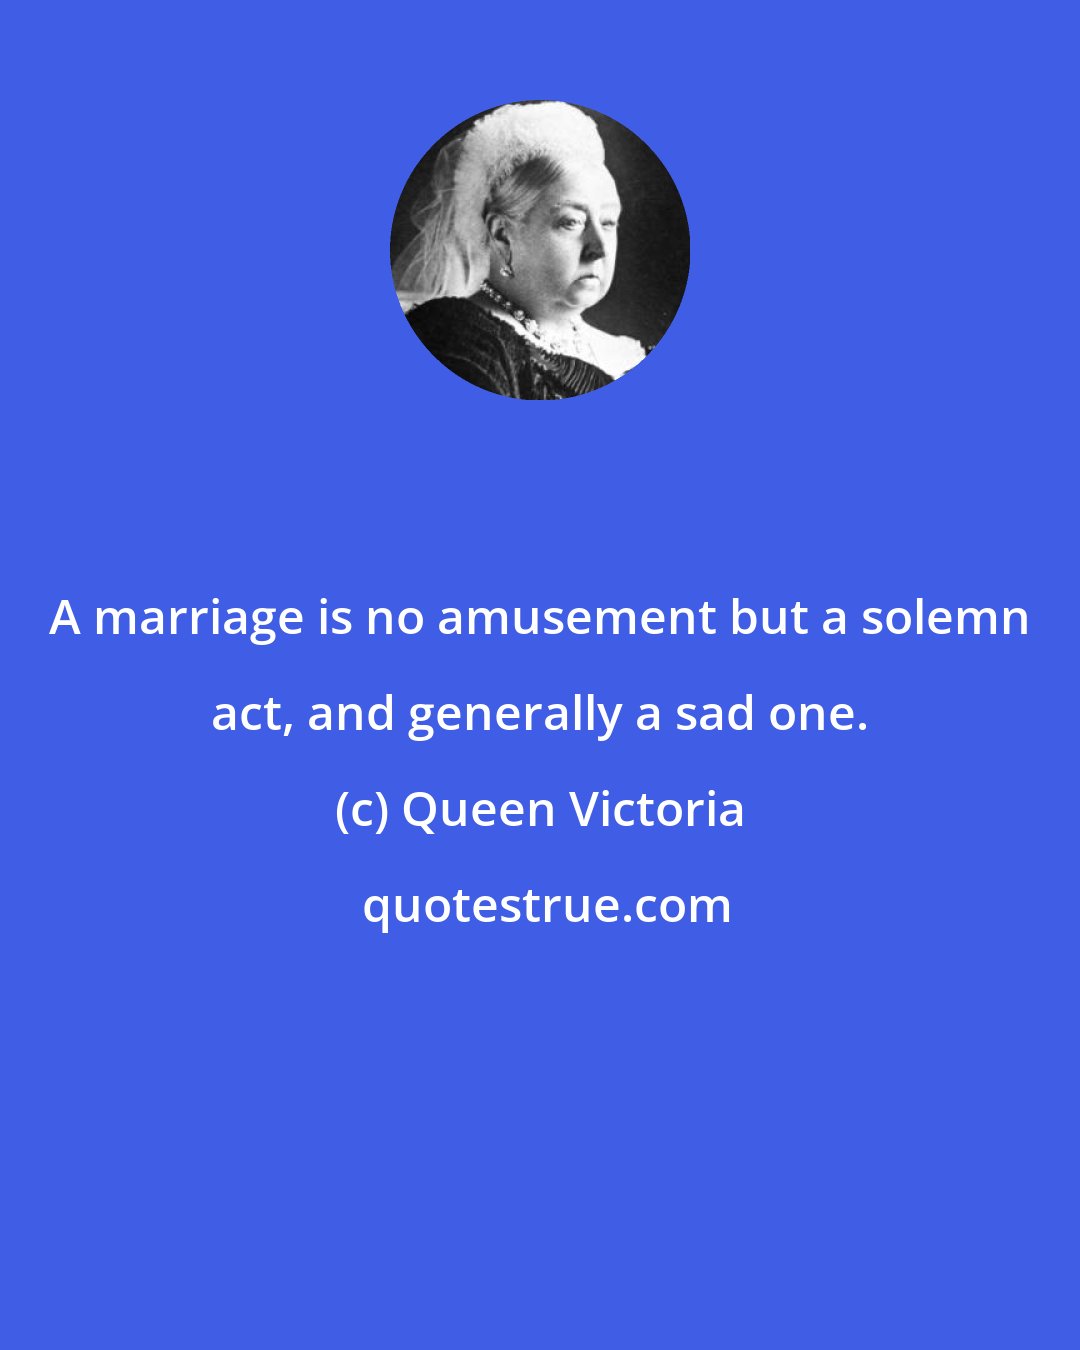 Queen Victoria: A marriage is no amusement but a solemn act, and generally a sad one.